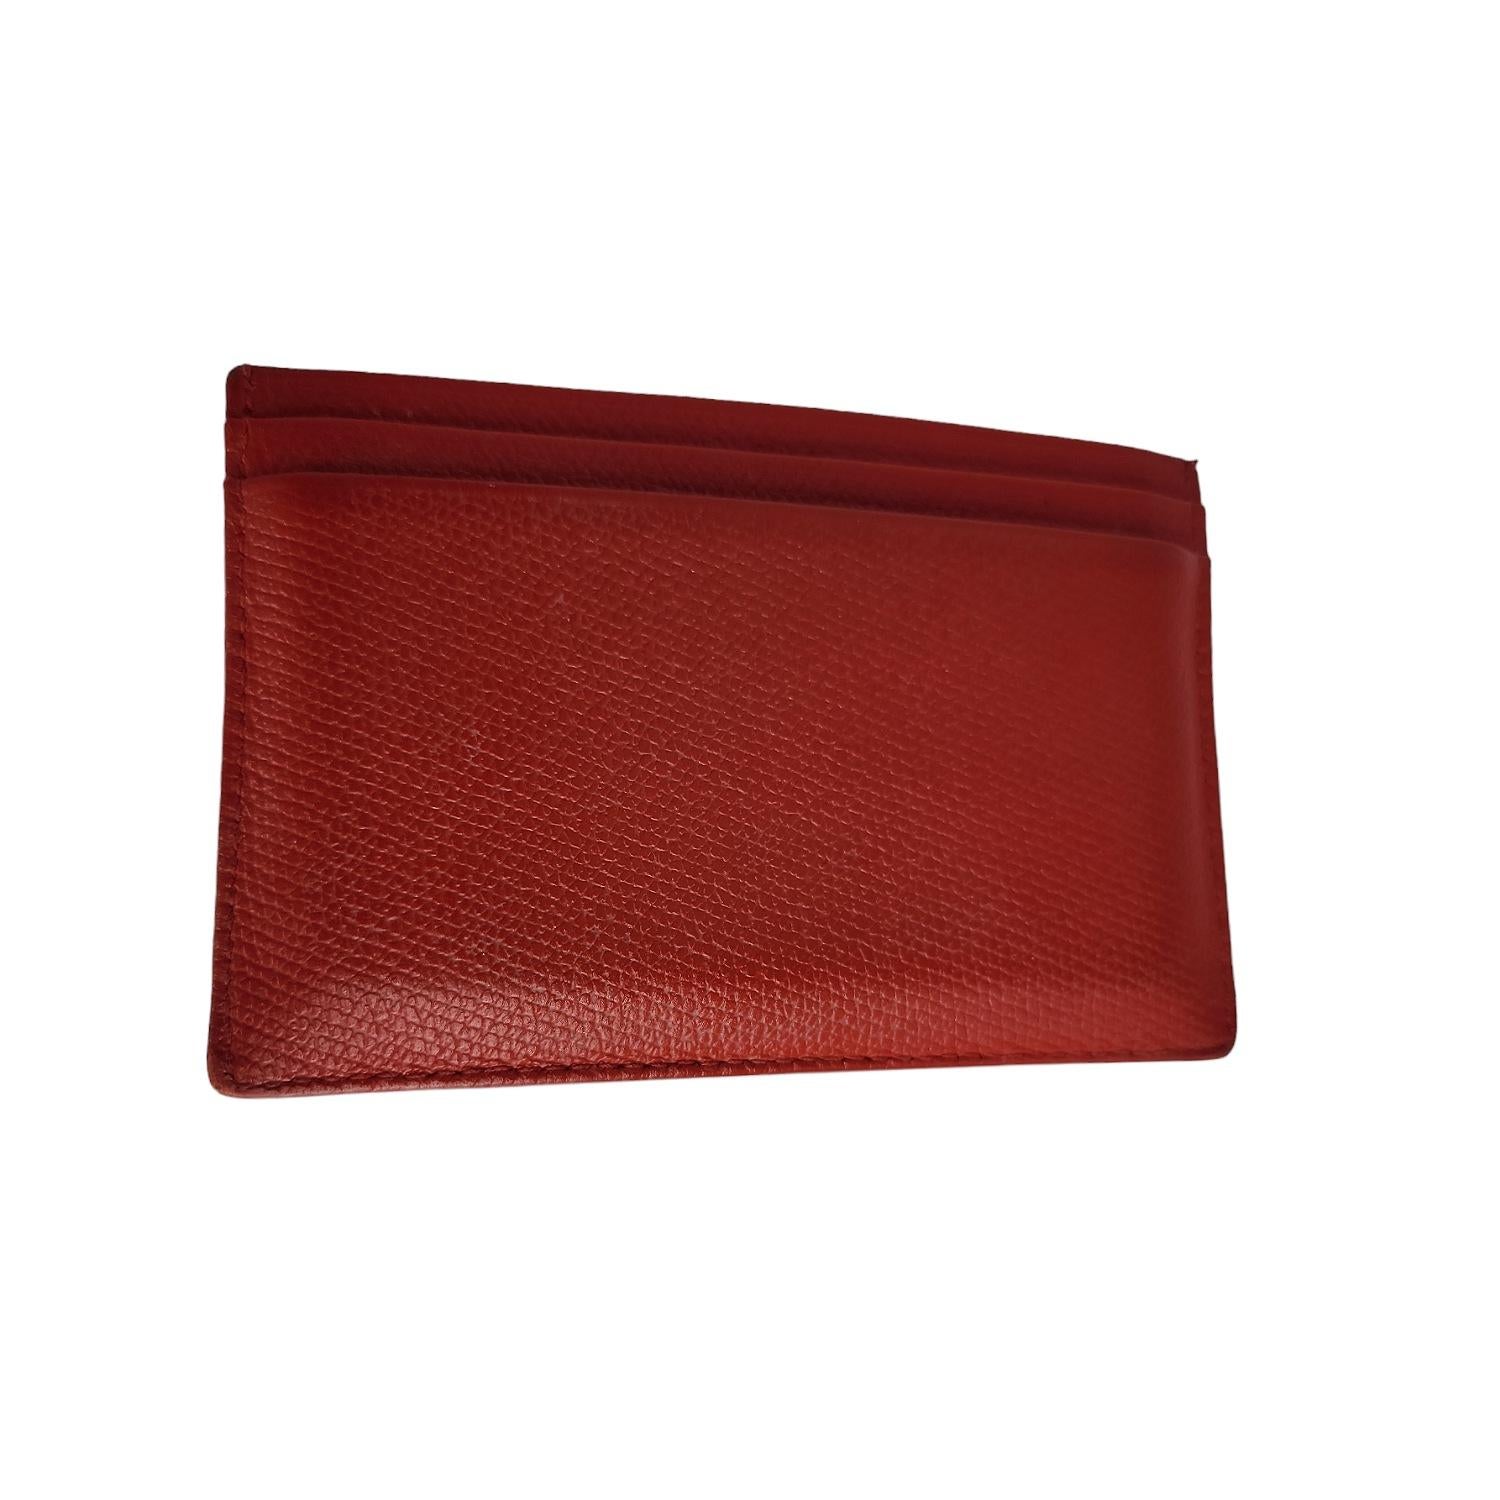 Vintage from the 2004-2005 Collection; this cardholder is crafted of red caviar leather. It features 1 card slot in front and 3 card slots in back, it's beautifully adorned with a small polished light gold CC logo on the front.

Designer: